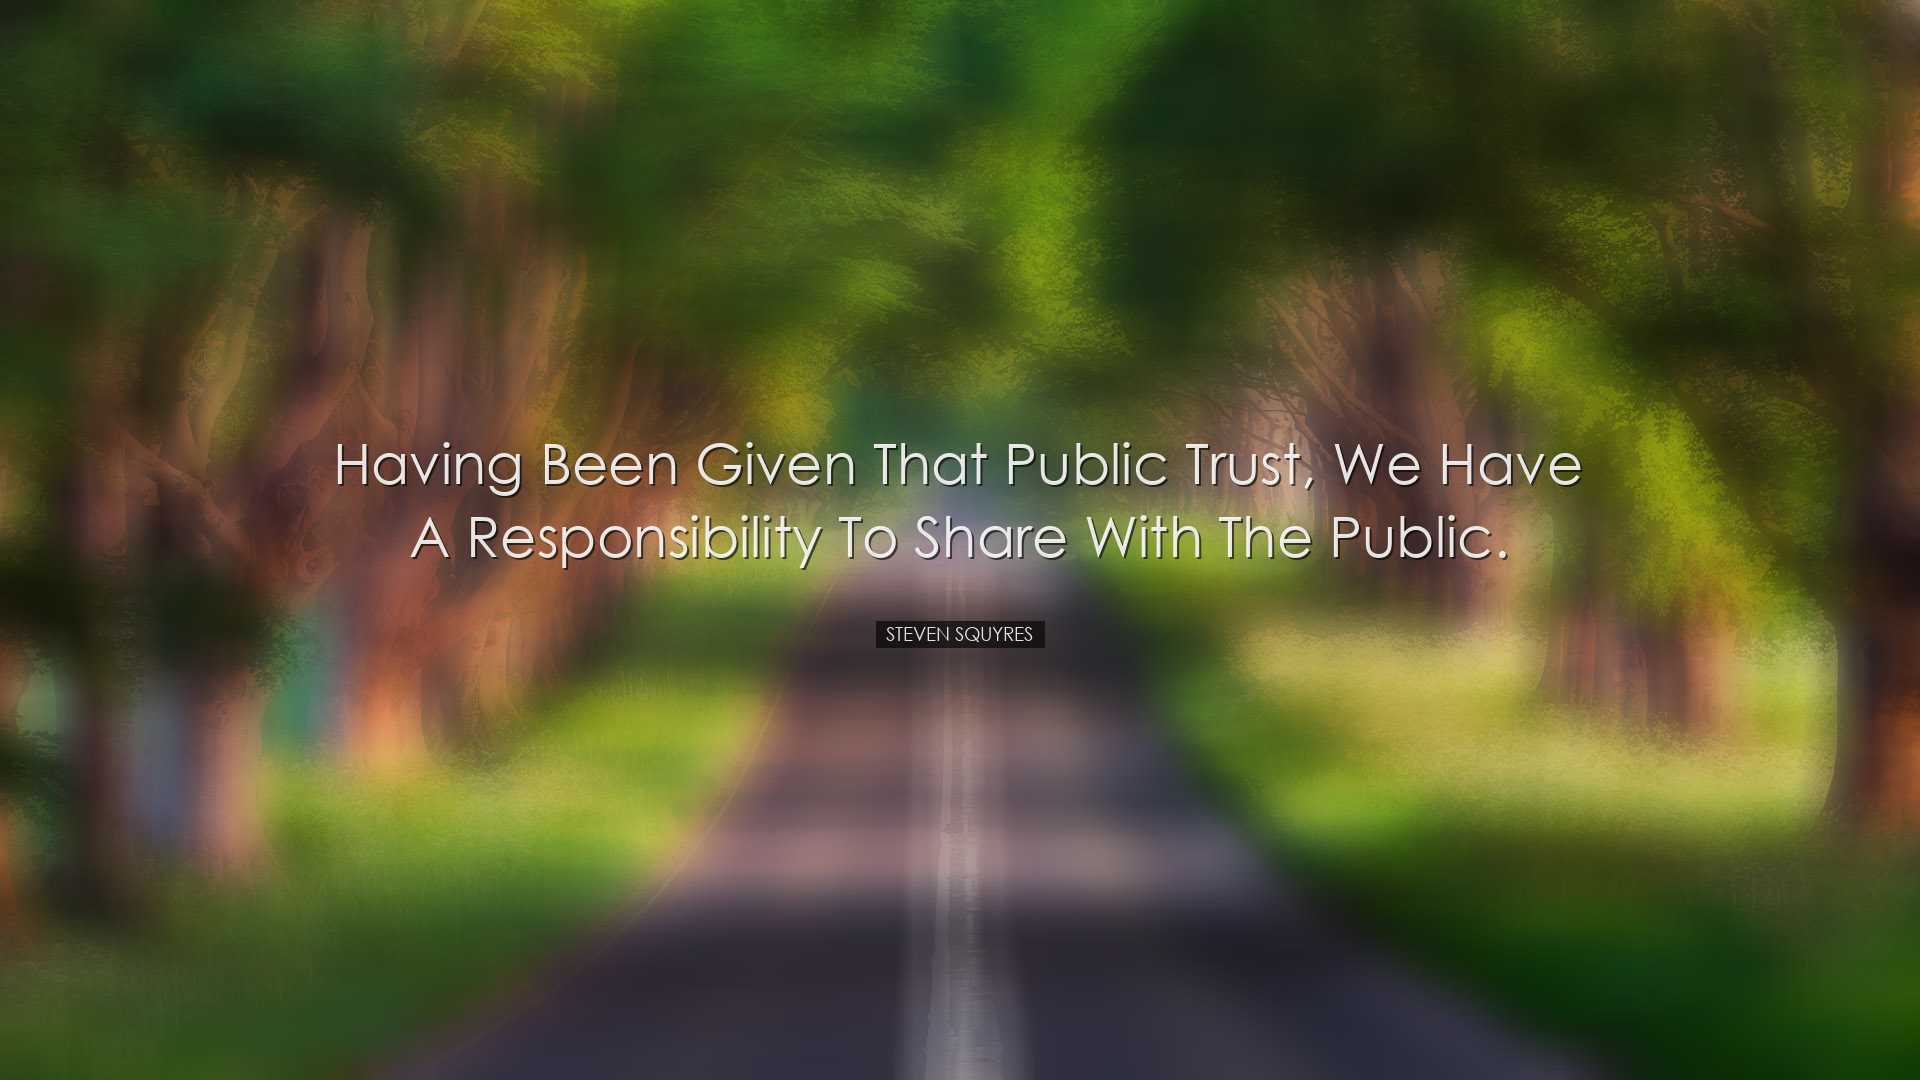 Having been given that public trust, we have a responsibility to s